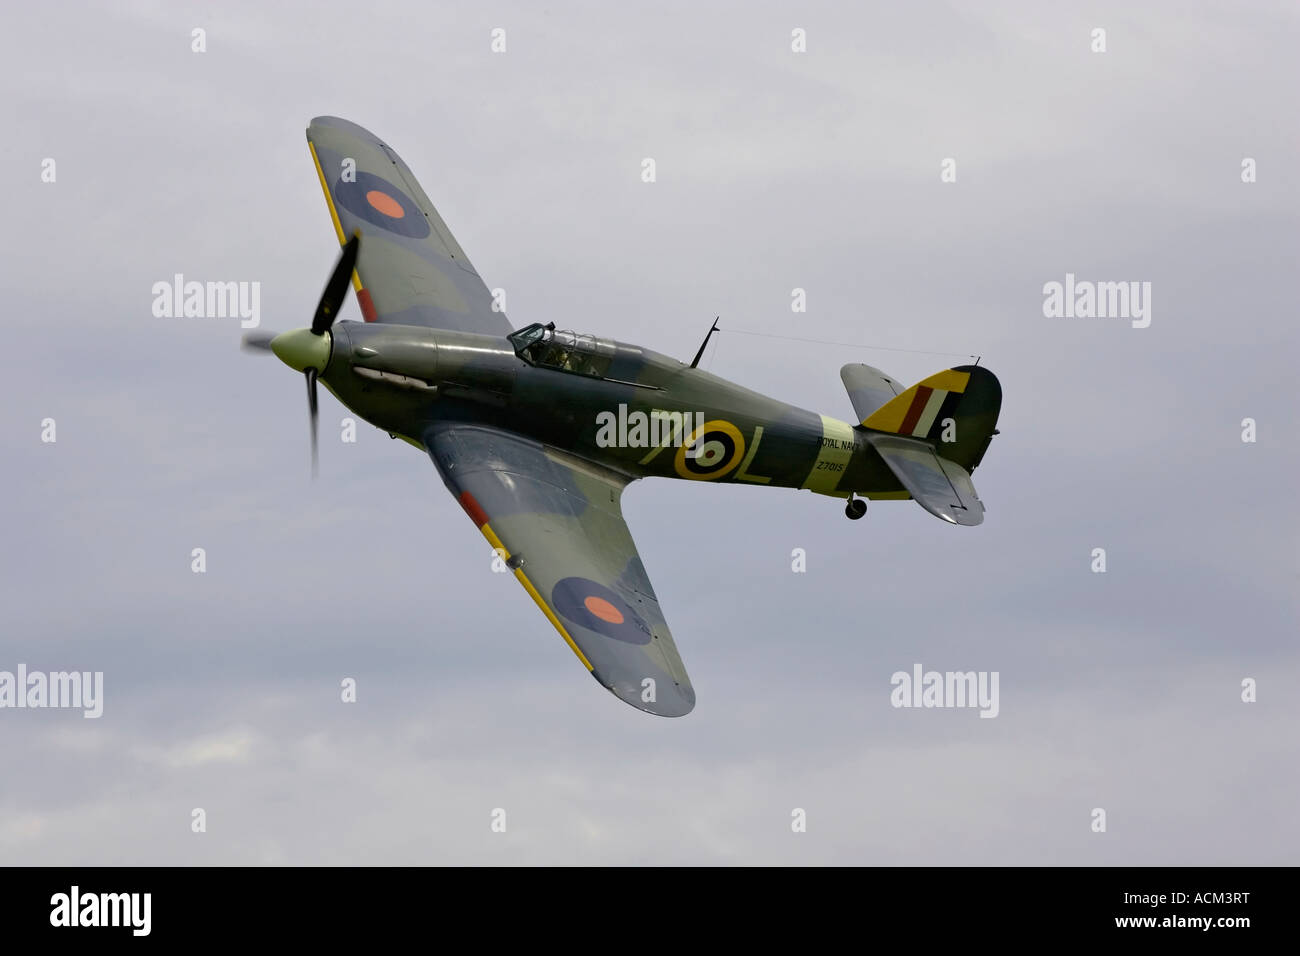 A Hawker Hurricane Sea Hurricane of the shuttleworth collection going through its paces Stock Photo